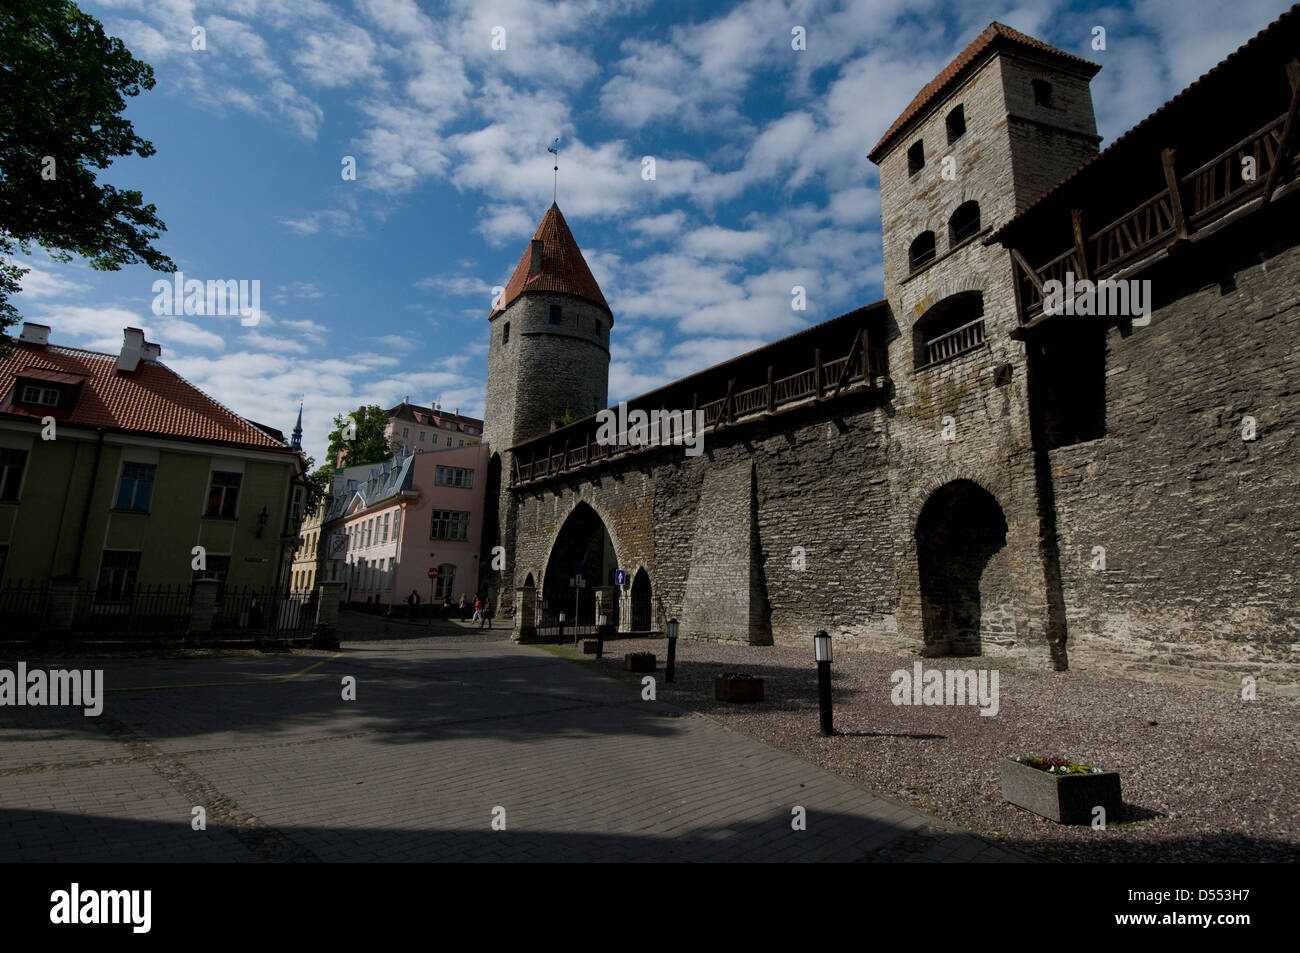 Nunna and Sauna towers and the Monastery Gate are part of the 1.85km original fortified city wall in Tallinn Old Town, Tallinn Stock Photo